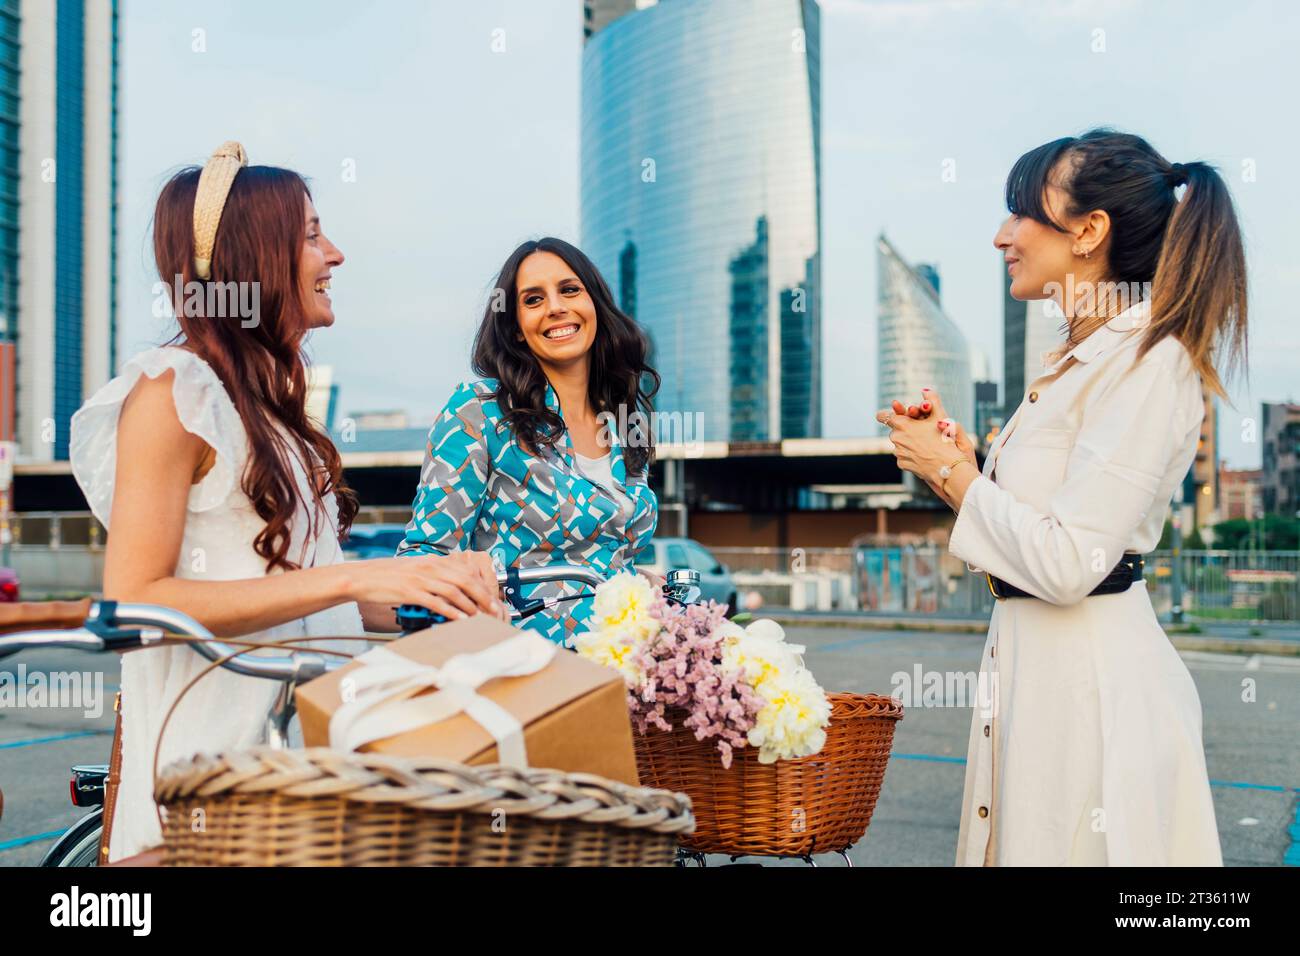 Happy woman with friends and bicycles in front of buildings Stock Photo